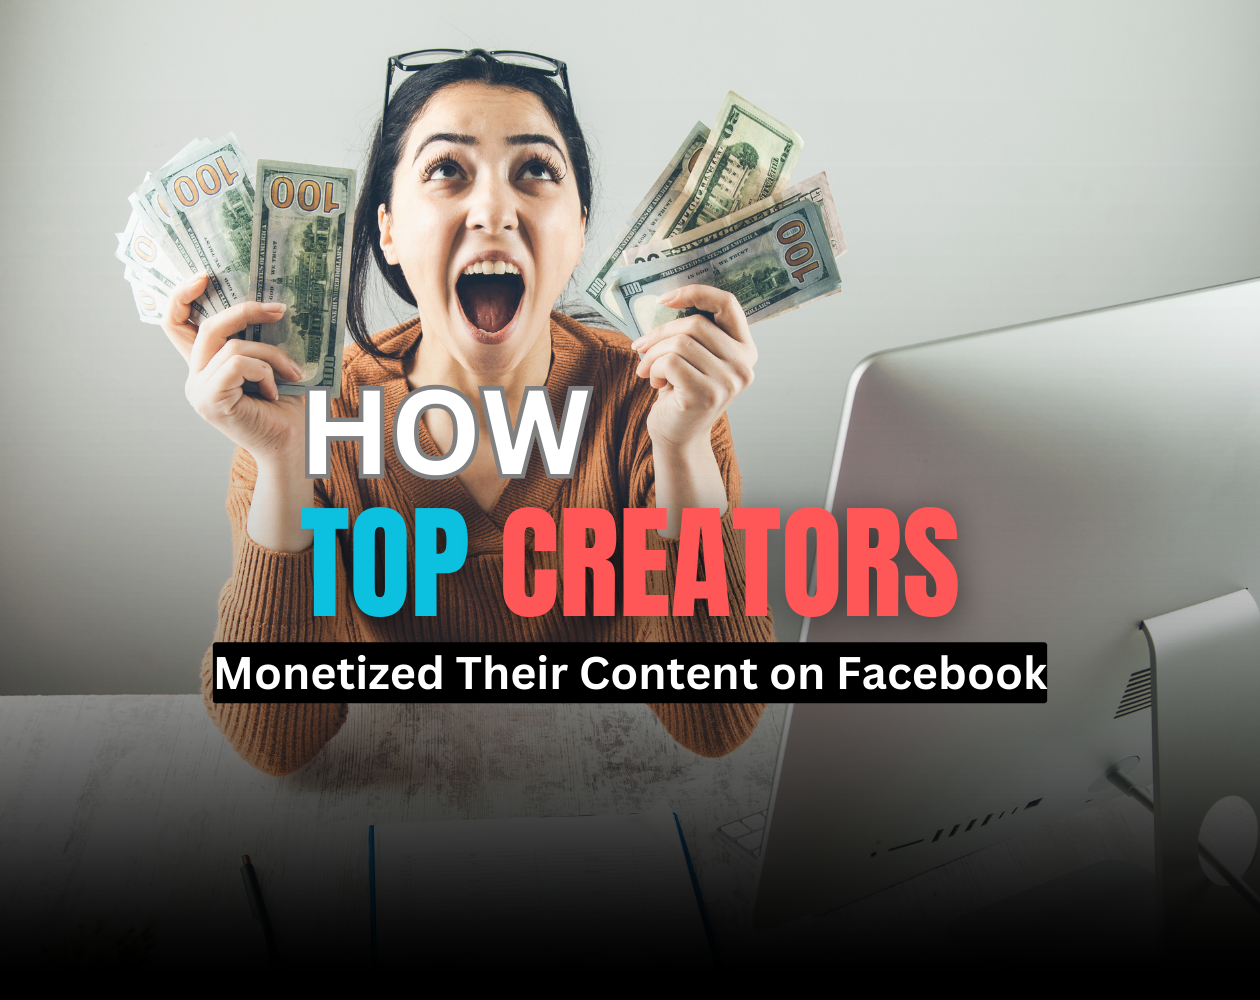 Making money on Facebook: How top creators monetize their content. You can earn money by using ads alongside your content. There are ways to use ads while keeping your content front and center, including adding In-Stream Ads to your Live and on-demand vid